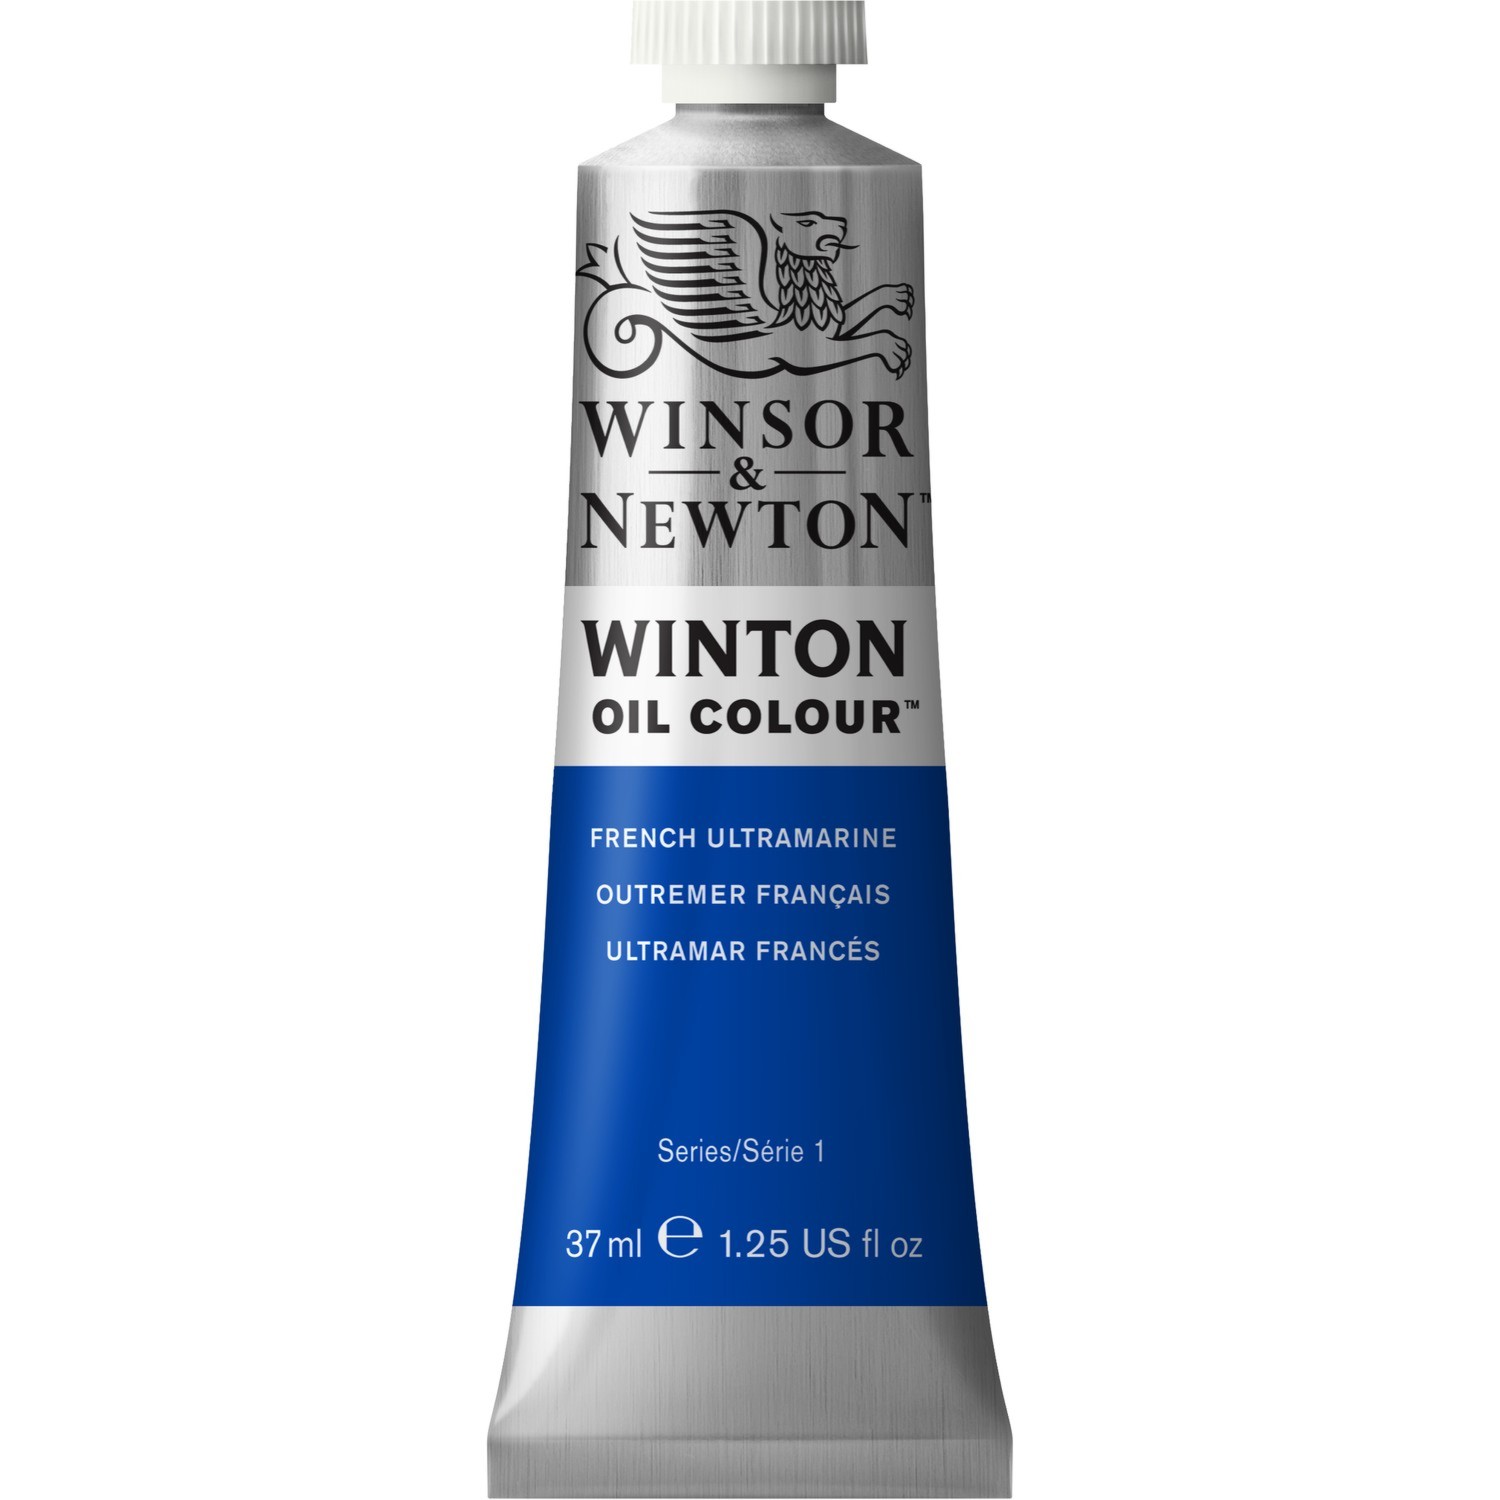 Winsor and Newton 37ml Winton Oil Colours - French ultramarine Image 1